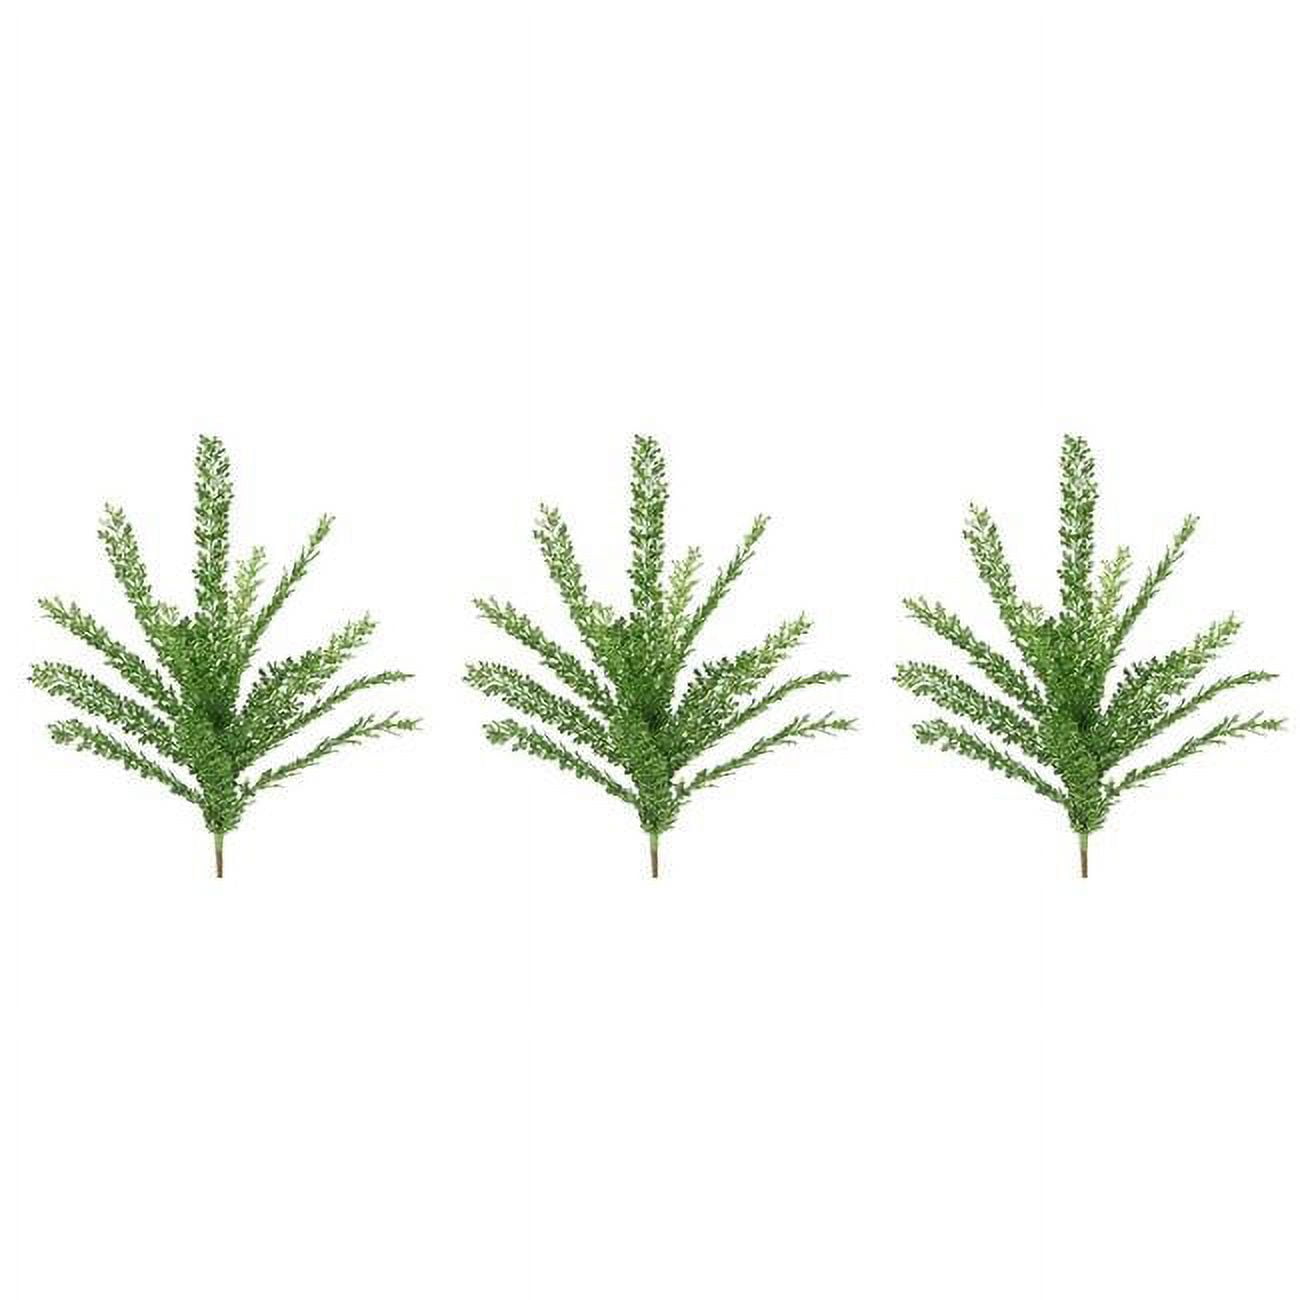 Admired By Nature Gxl7706-green-3 23 In. Glitter Filigree Leaf Spray Christmas Decor, Green - Set Of 3